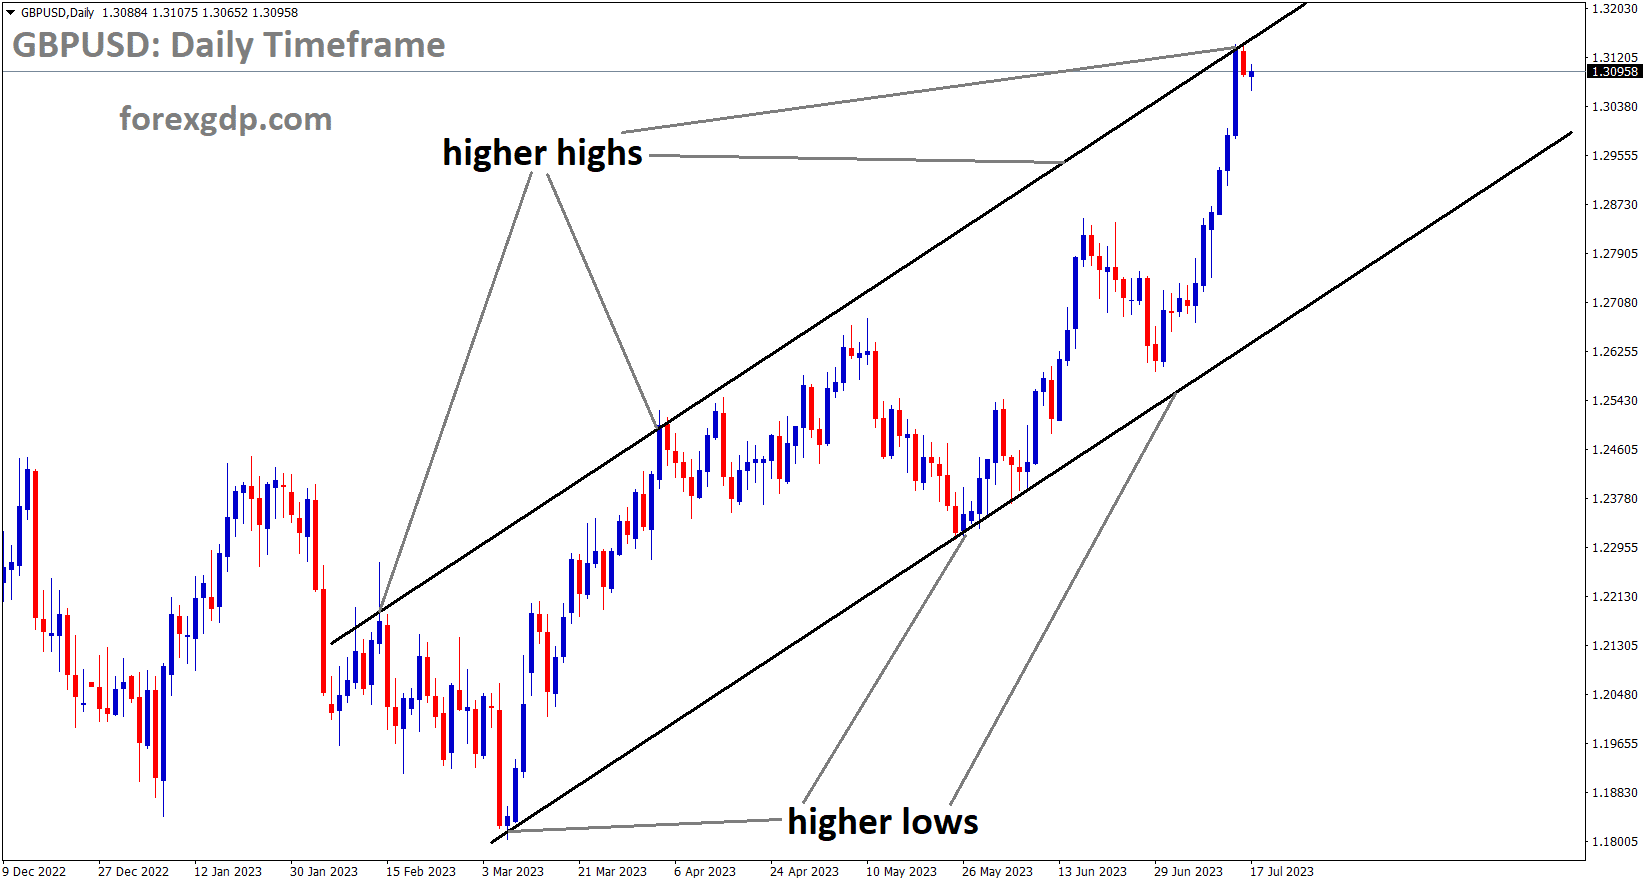 GBPUSD is moving in an Ascending channel and the market has reached the higher high area of the channel 3